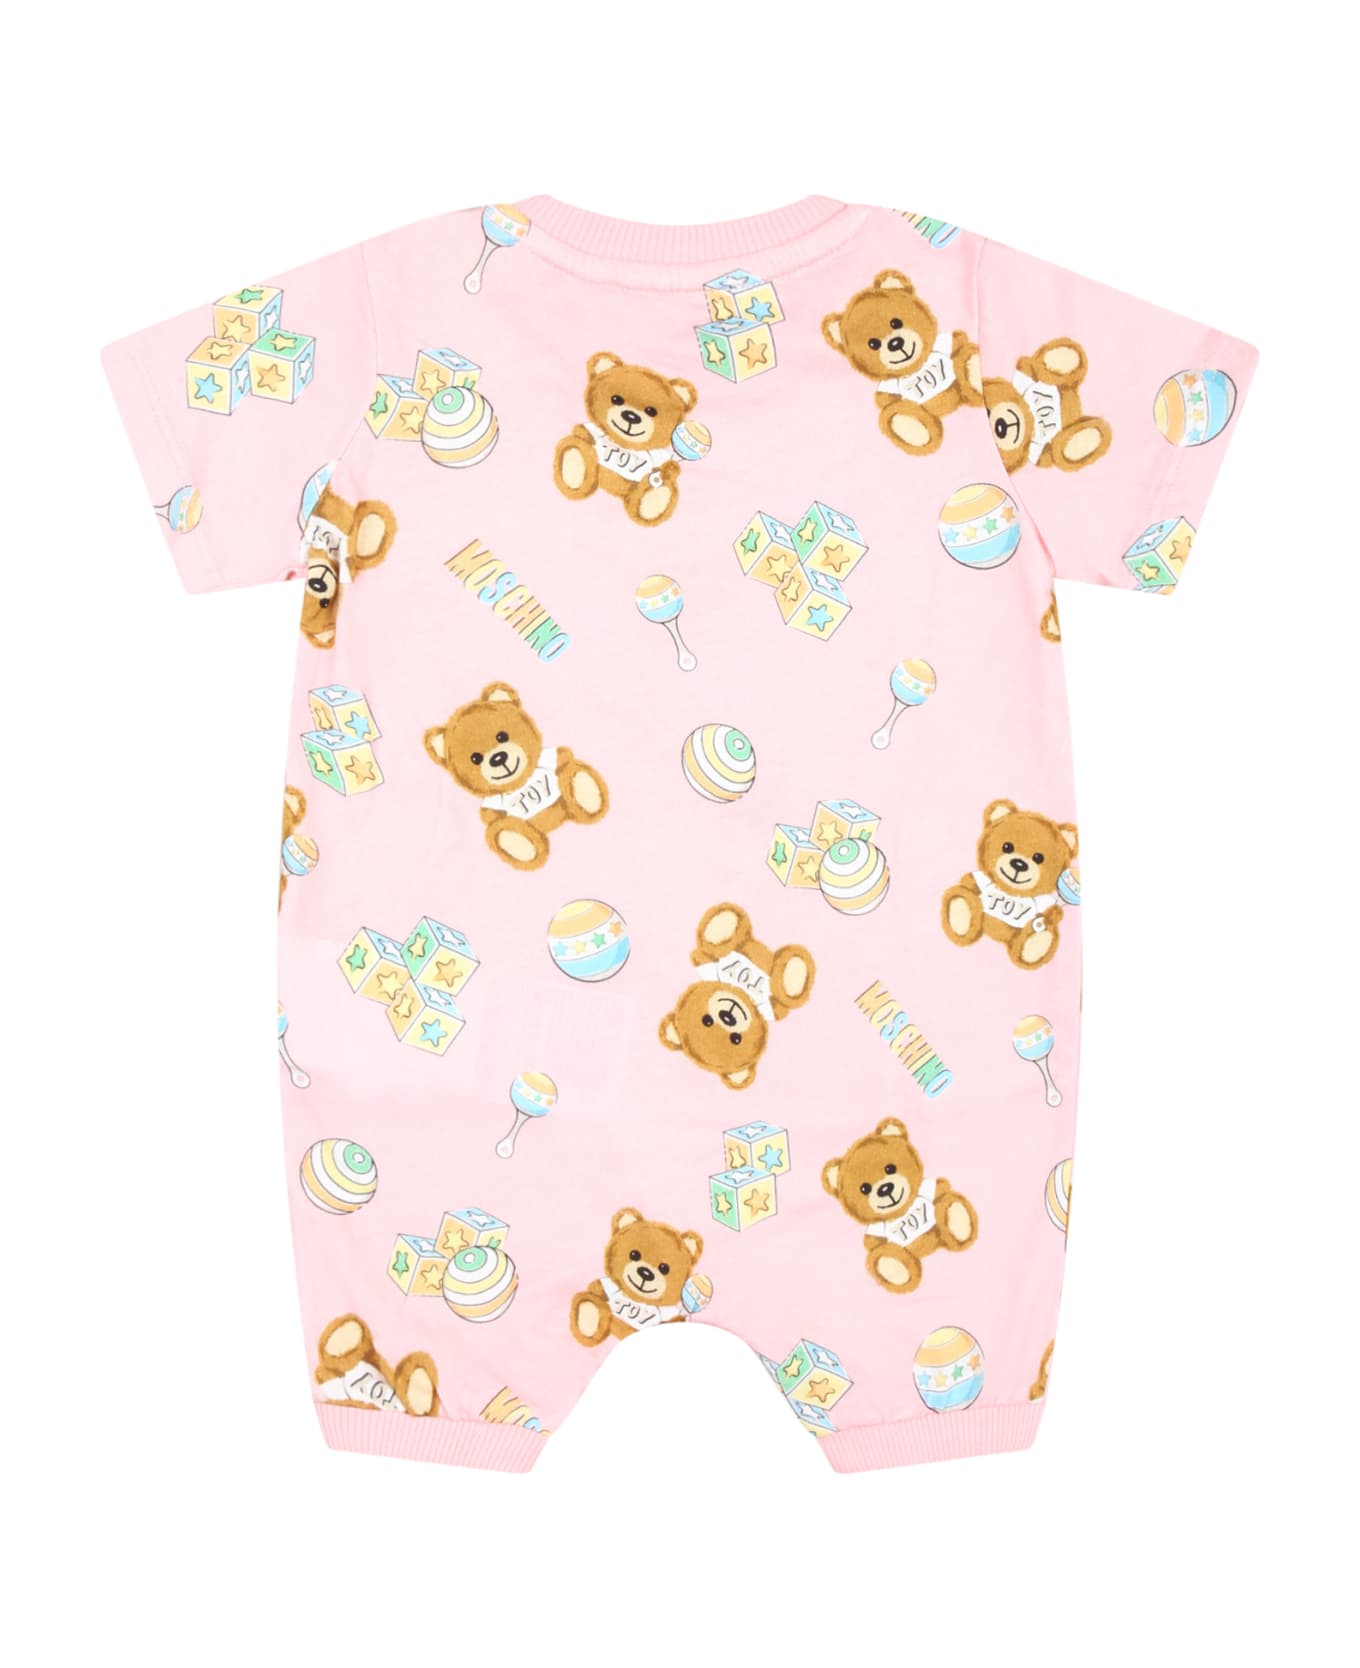 Moschino Pink Set For Baby Girl With Teddy Bear - Pink